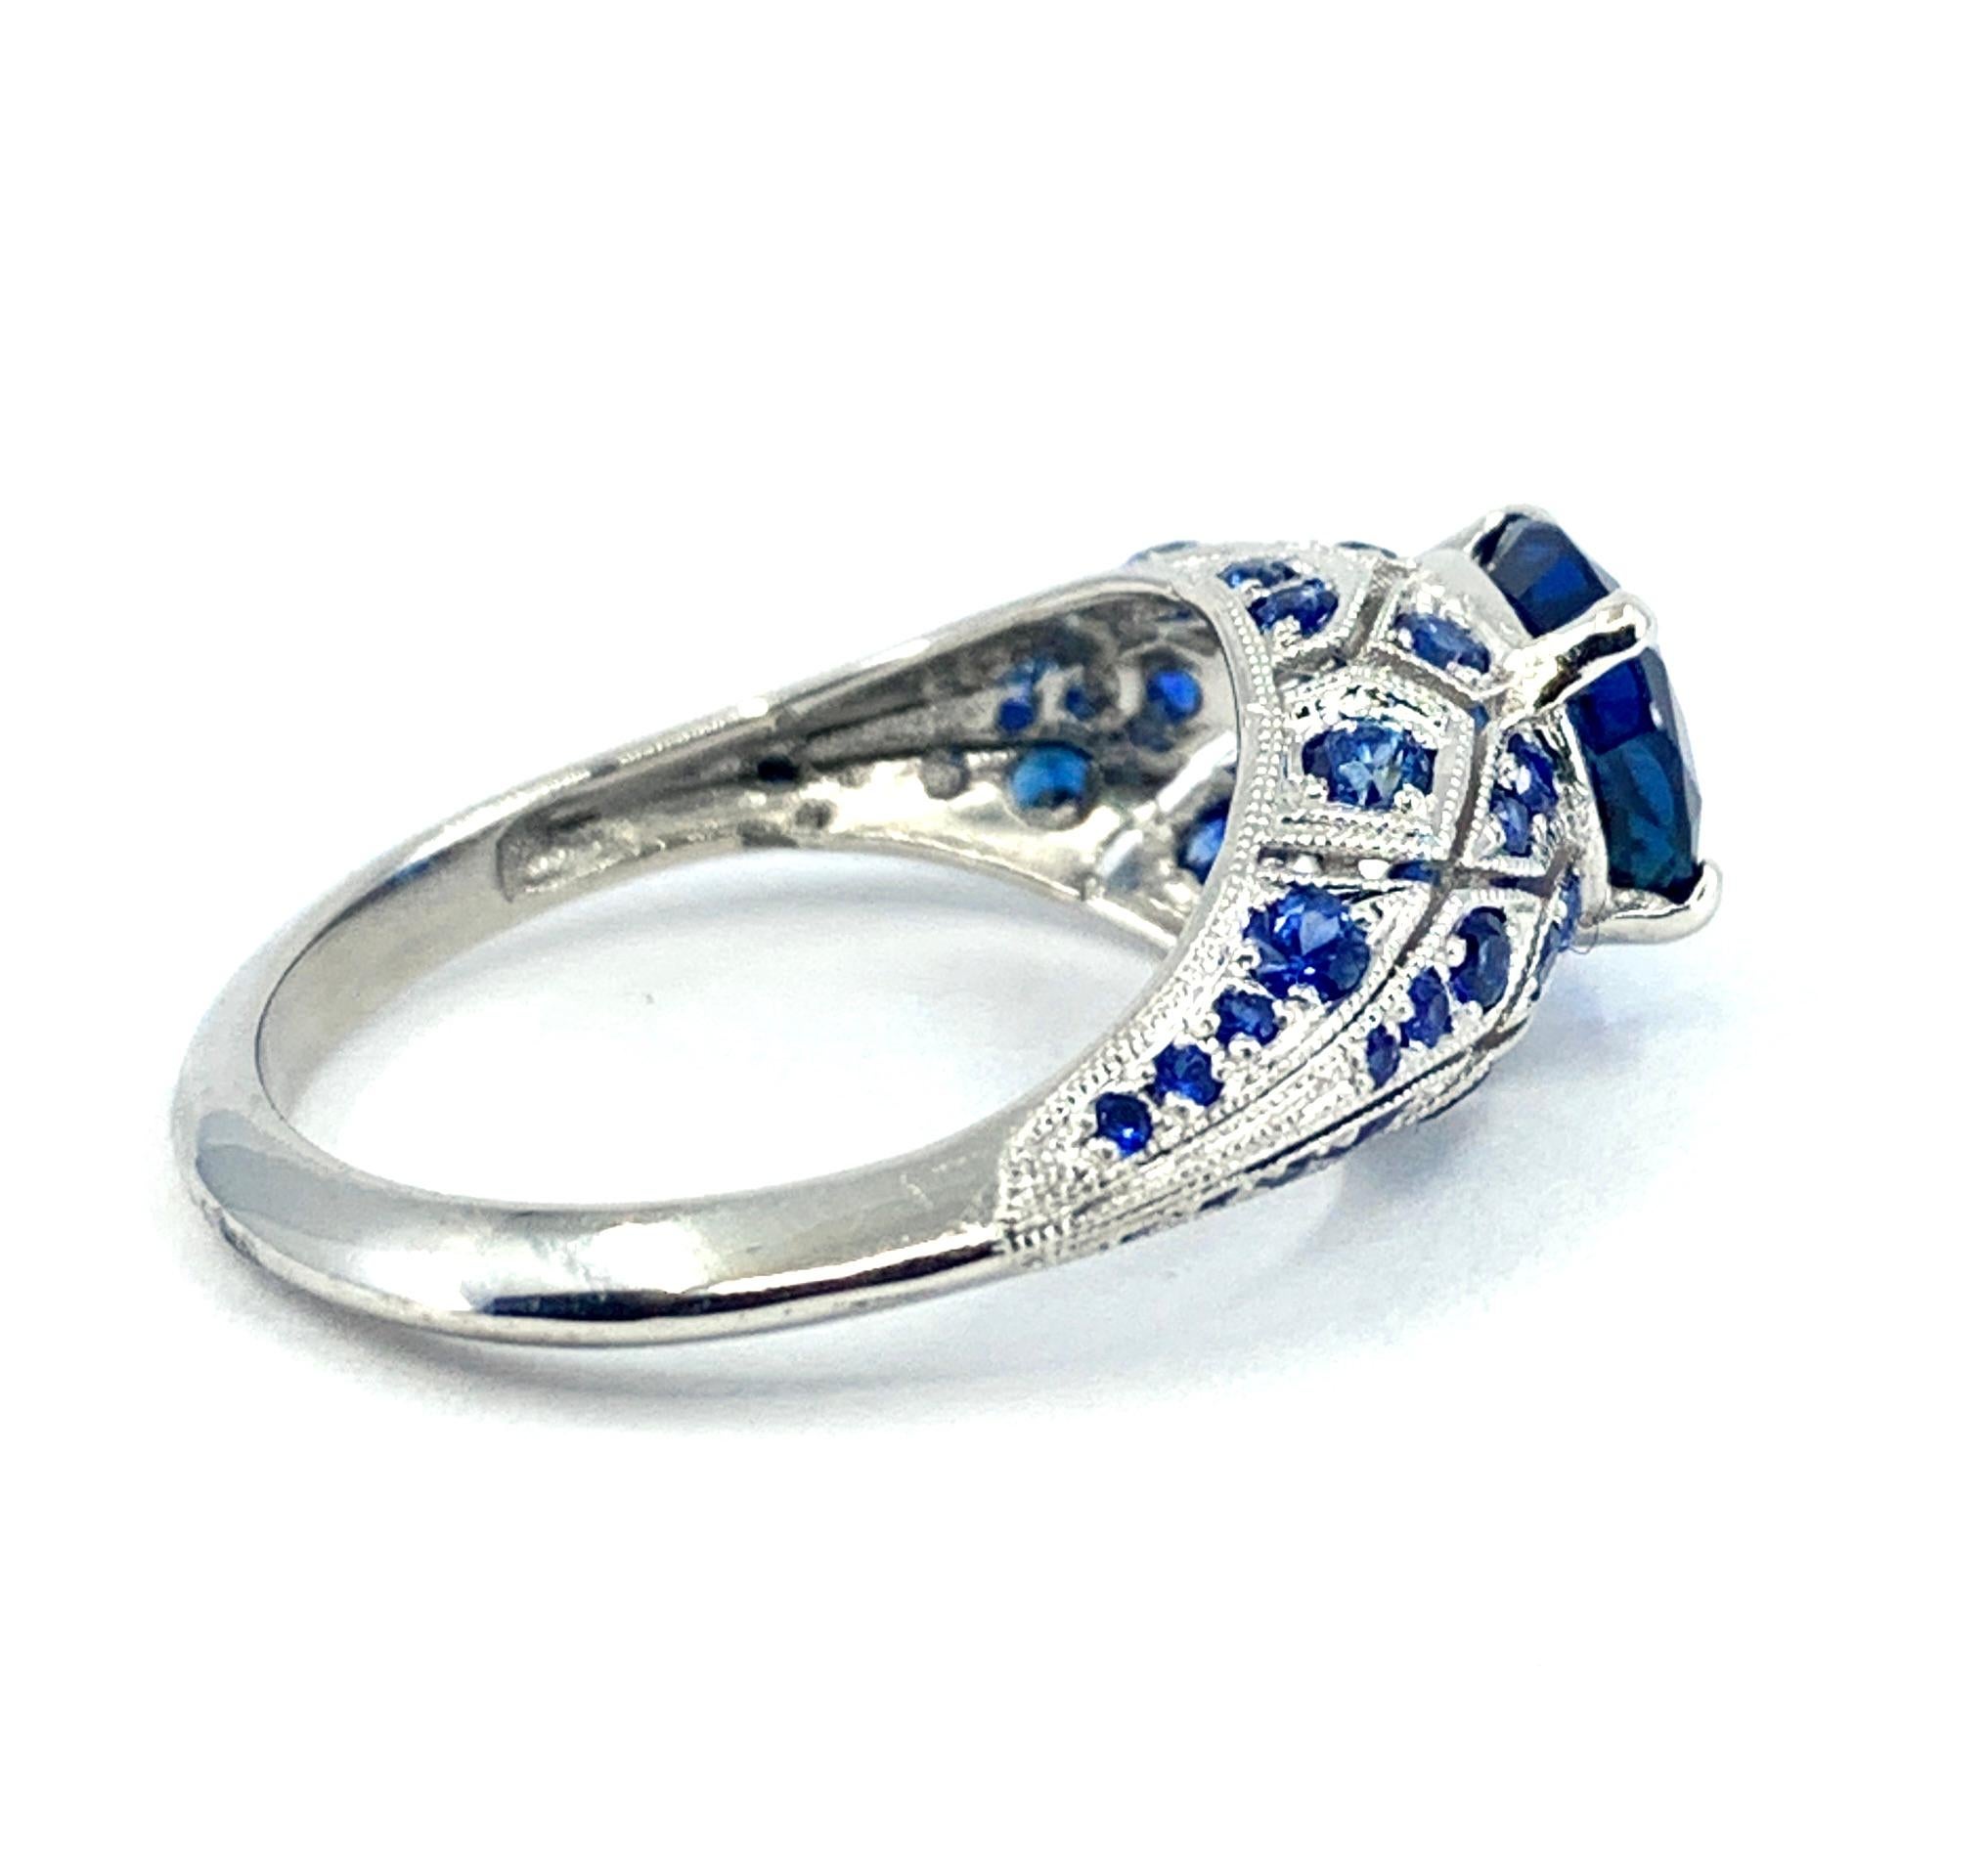 GIA-Certified 1.99 Carat Oval Sapphire in Platinum Edwardian-Style Bombe Setting For Sale 4